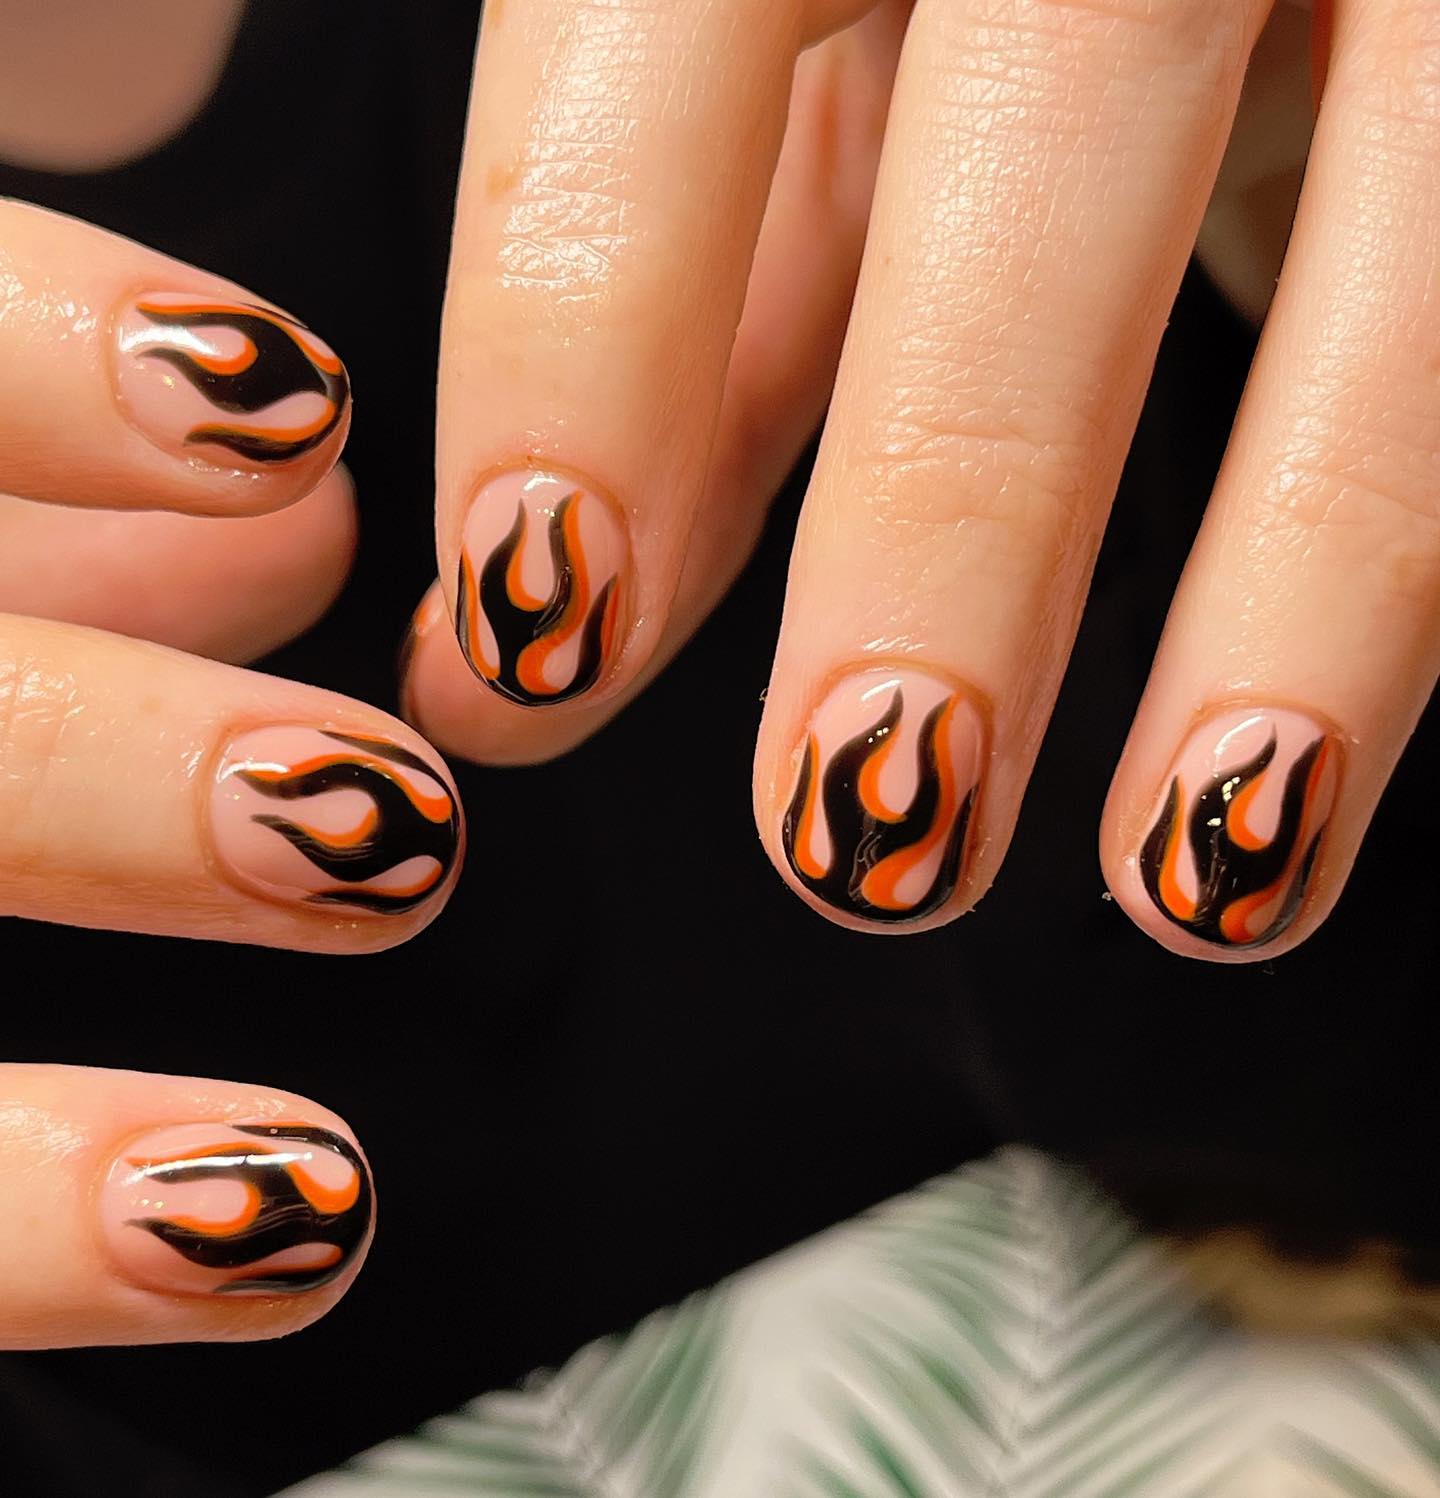 Short nails are simple as well as nude ones. Wanna cheer up your nails with something unique? Then, let's cover your nails with flames that are painted with black and orange.